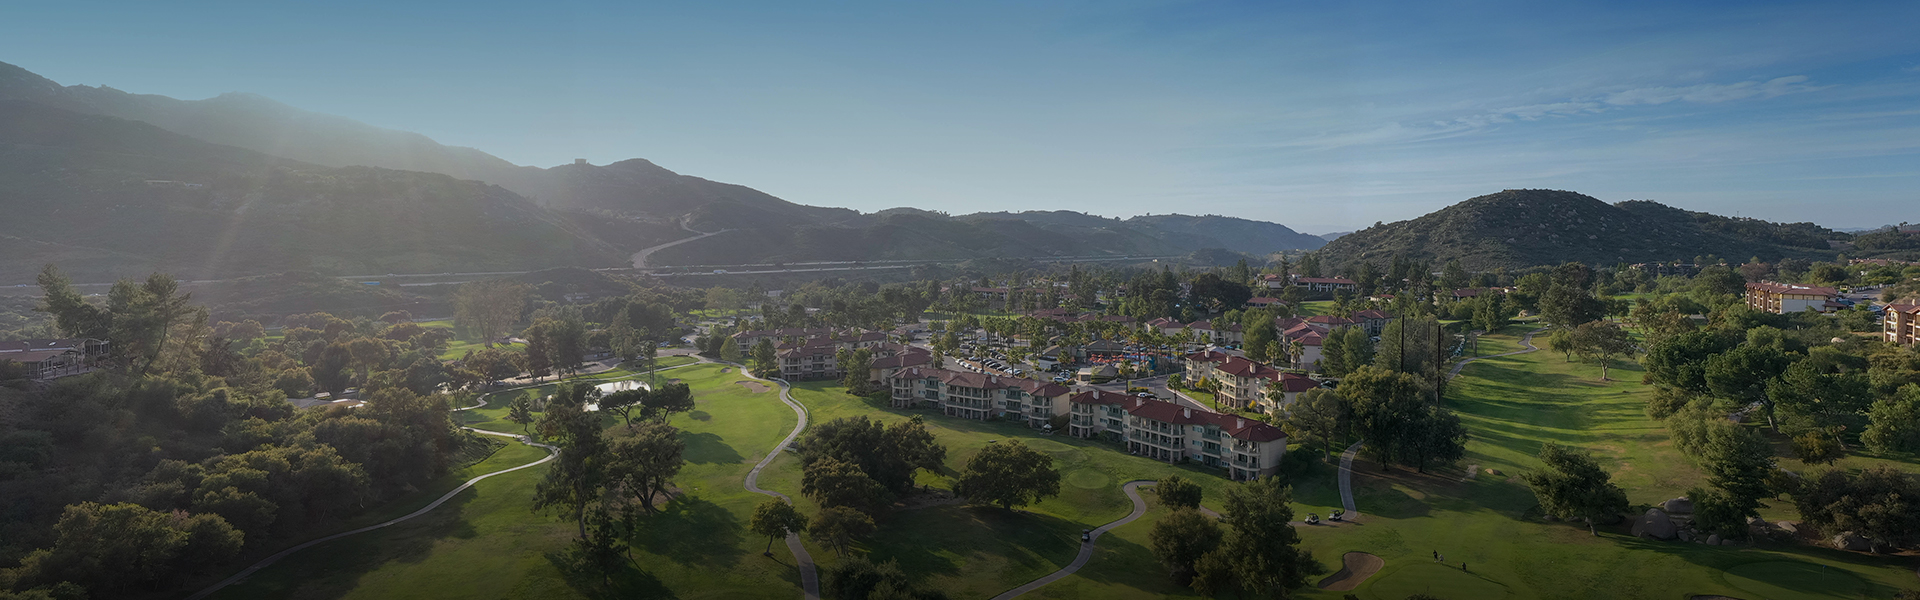 a panoramic shot of the large property with many buildings, trees, and mountains 